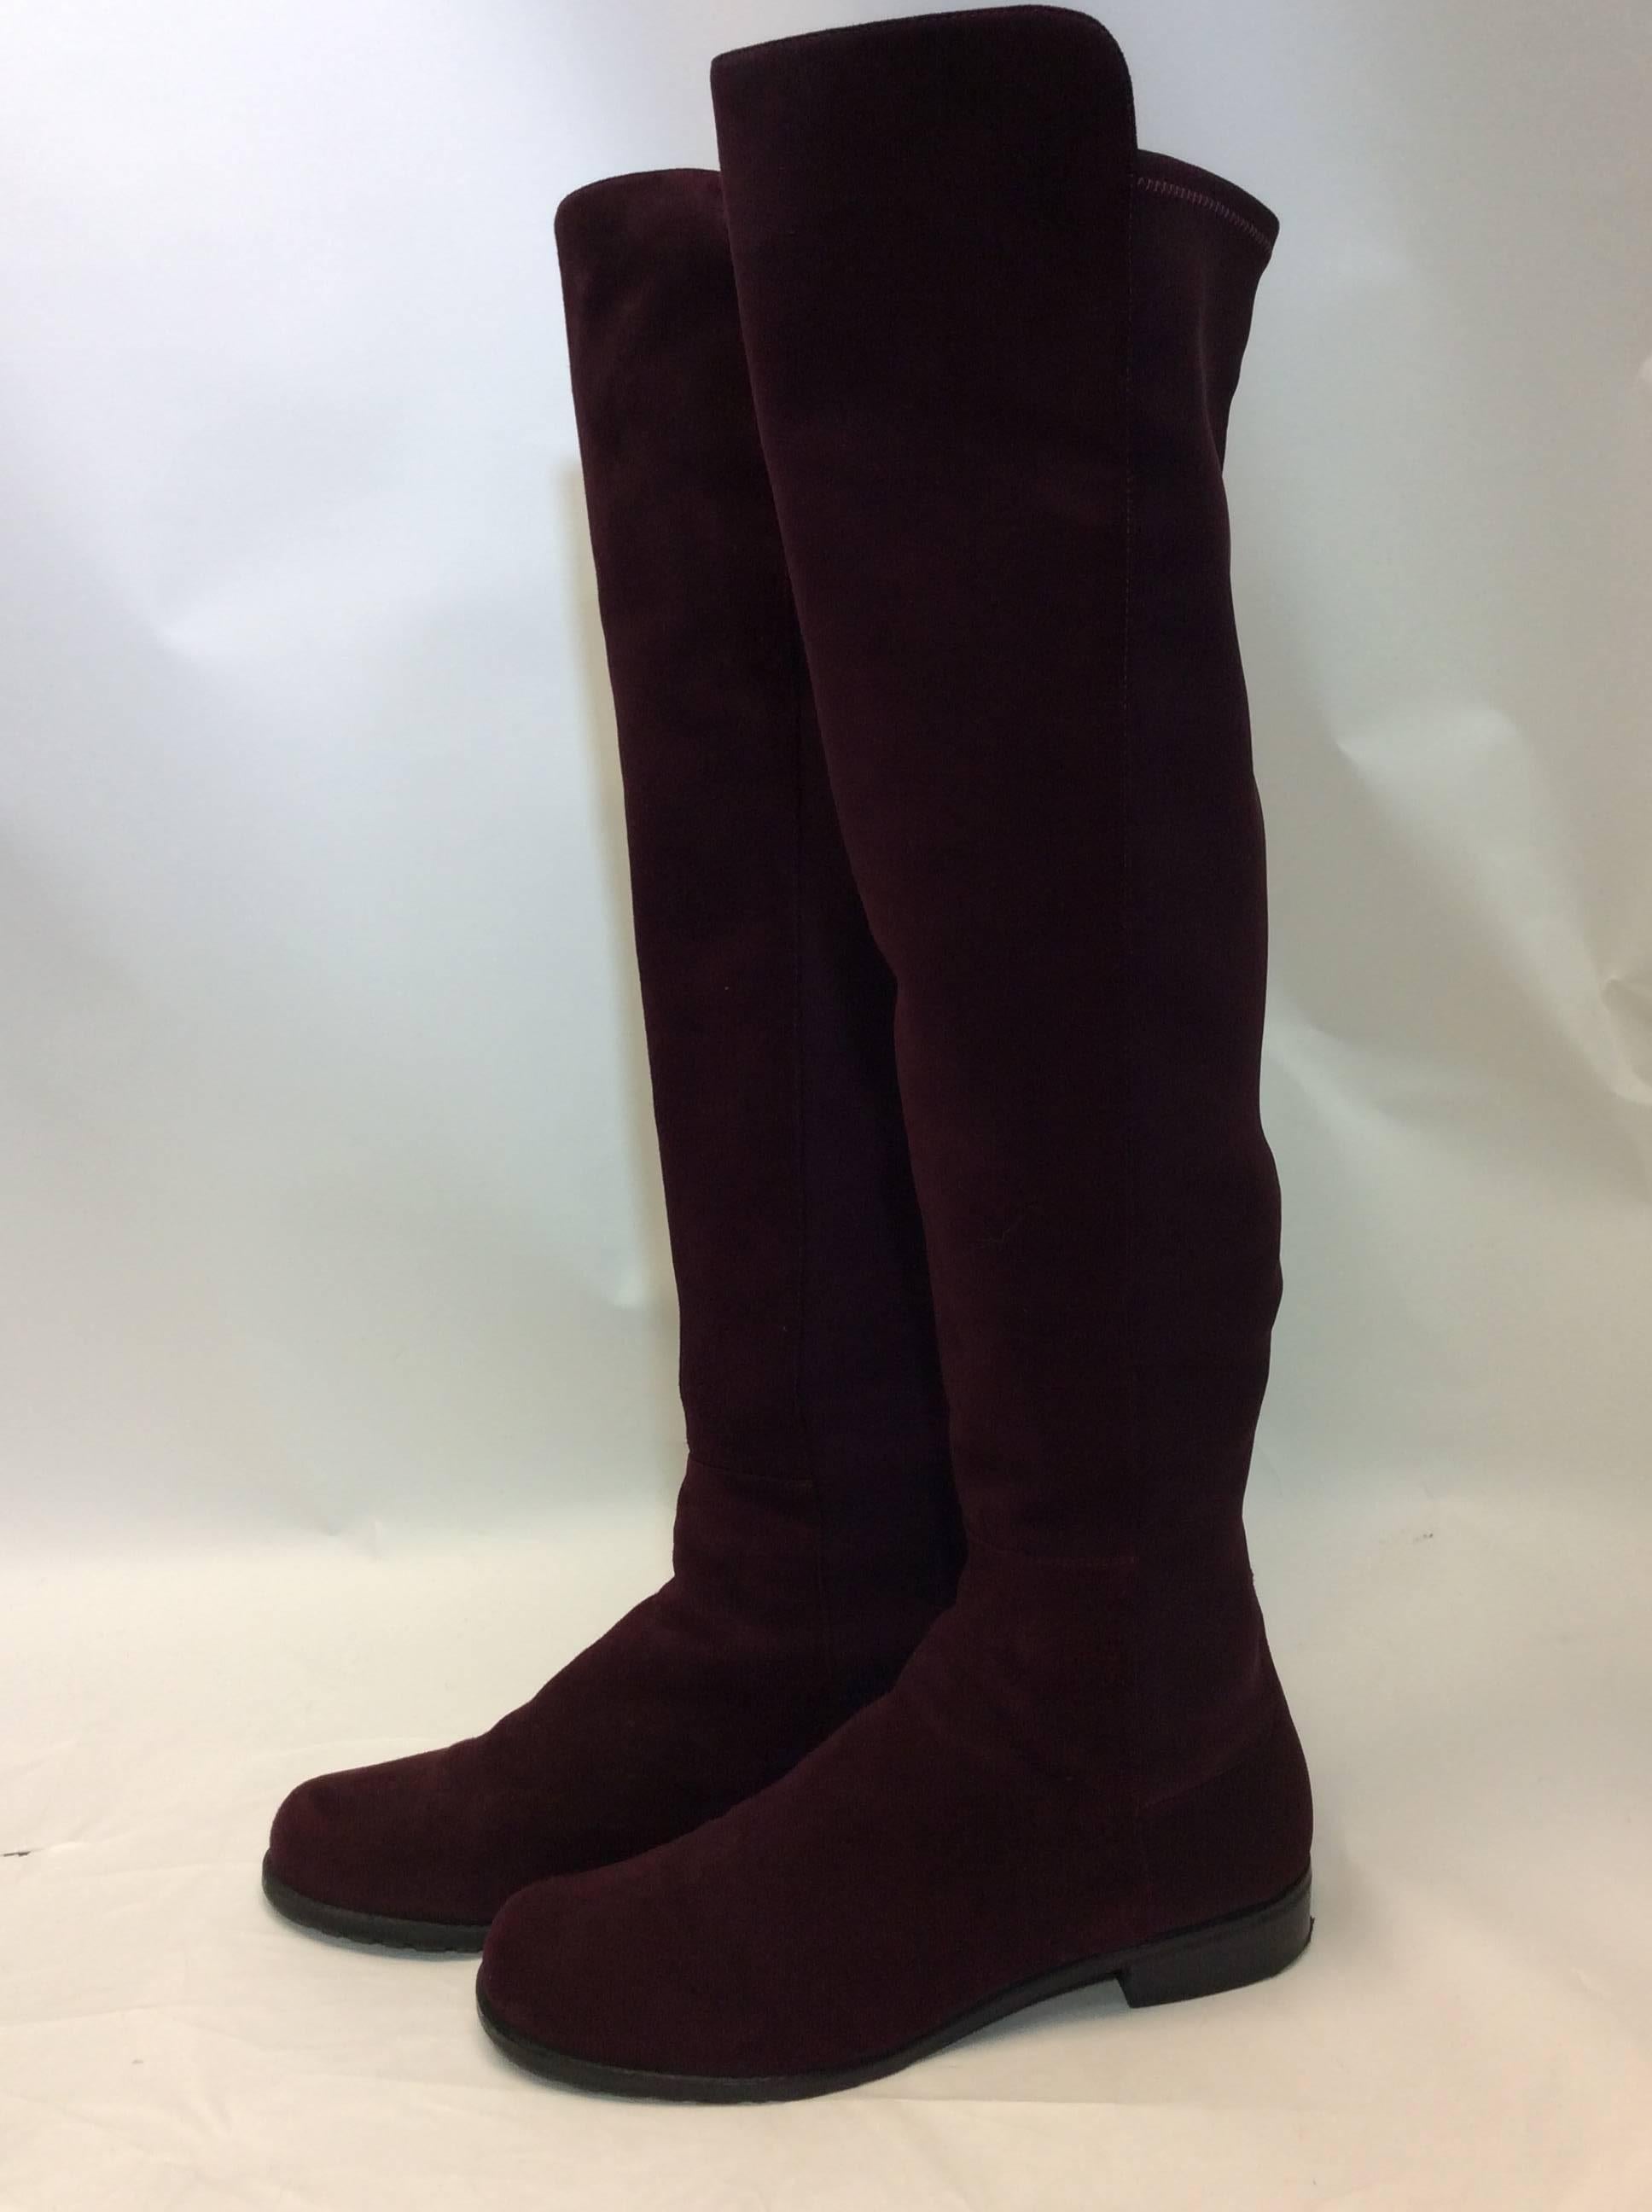 Stuart Weitzman Oxblood Suede Over The Knee Boots
Over the knee style
Size 9
$399
In excellent unworn condition
Oxblood coloring